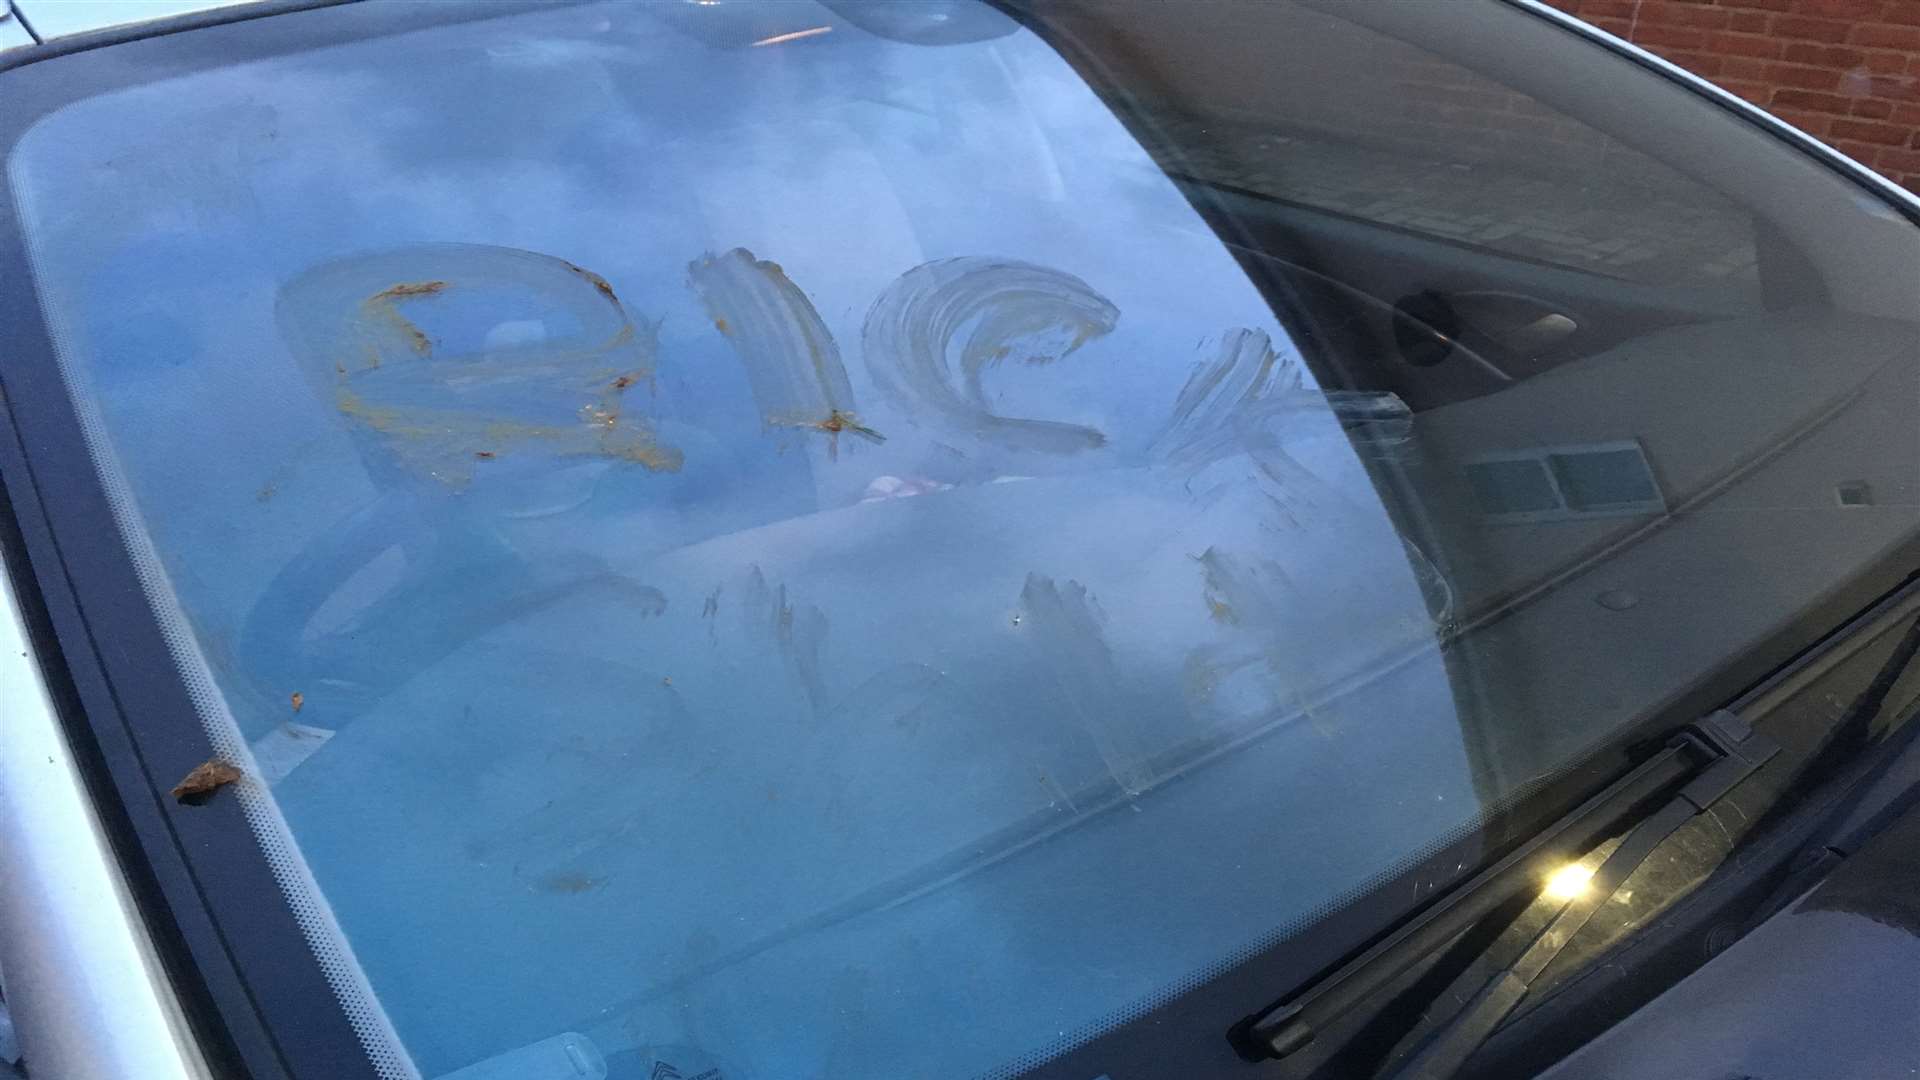 A message reminding the woman to pick up the mess was scribed on her car